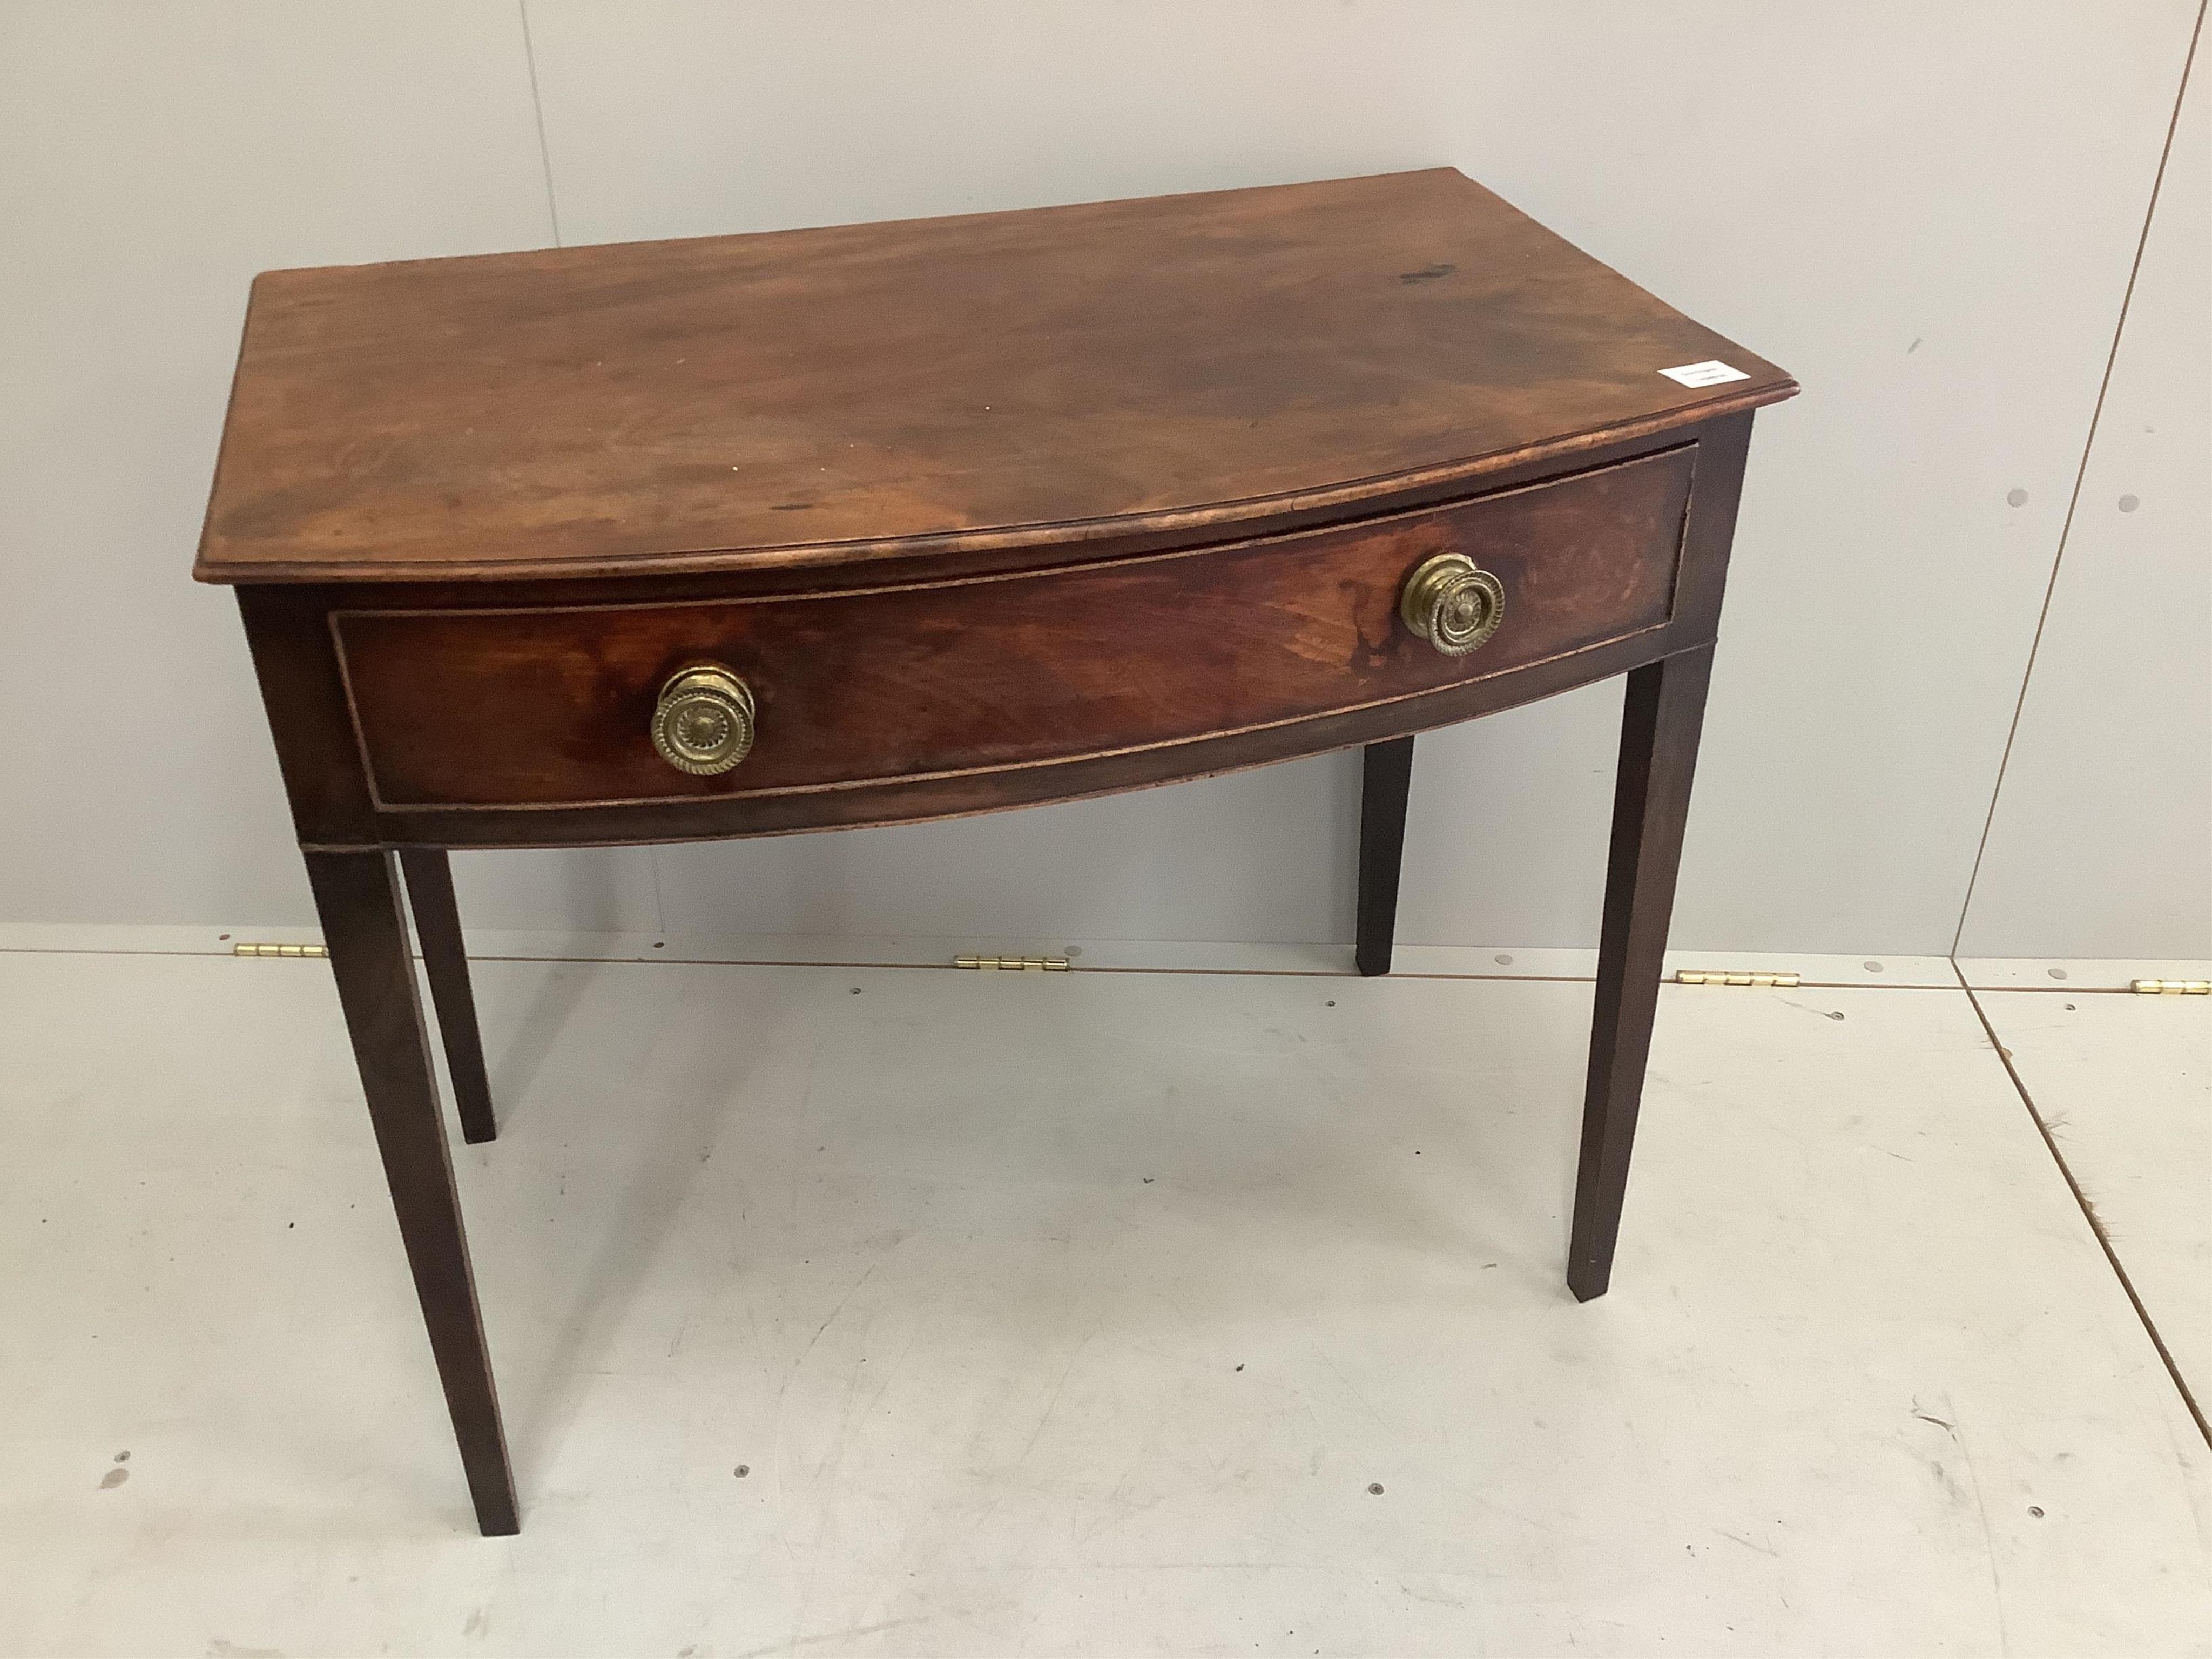 A George III mahogany bowfront side table, width 85cm, depth 53cm, height 71cm. Condition - fair